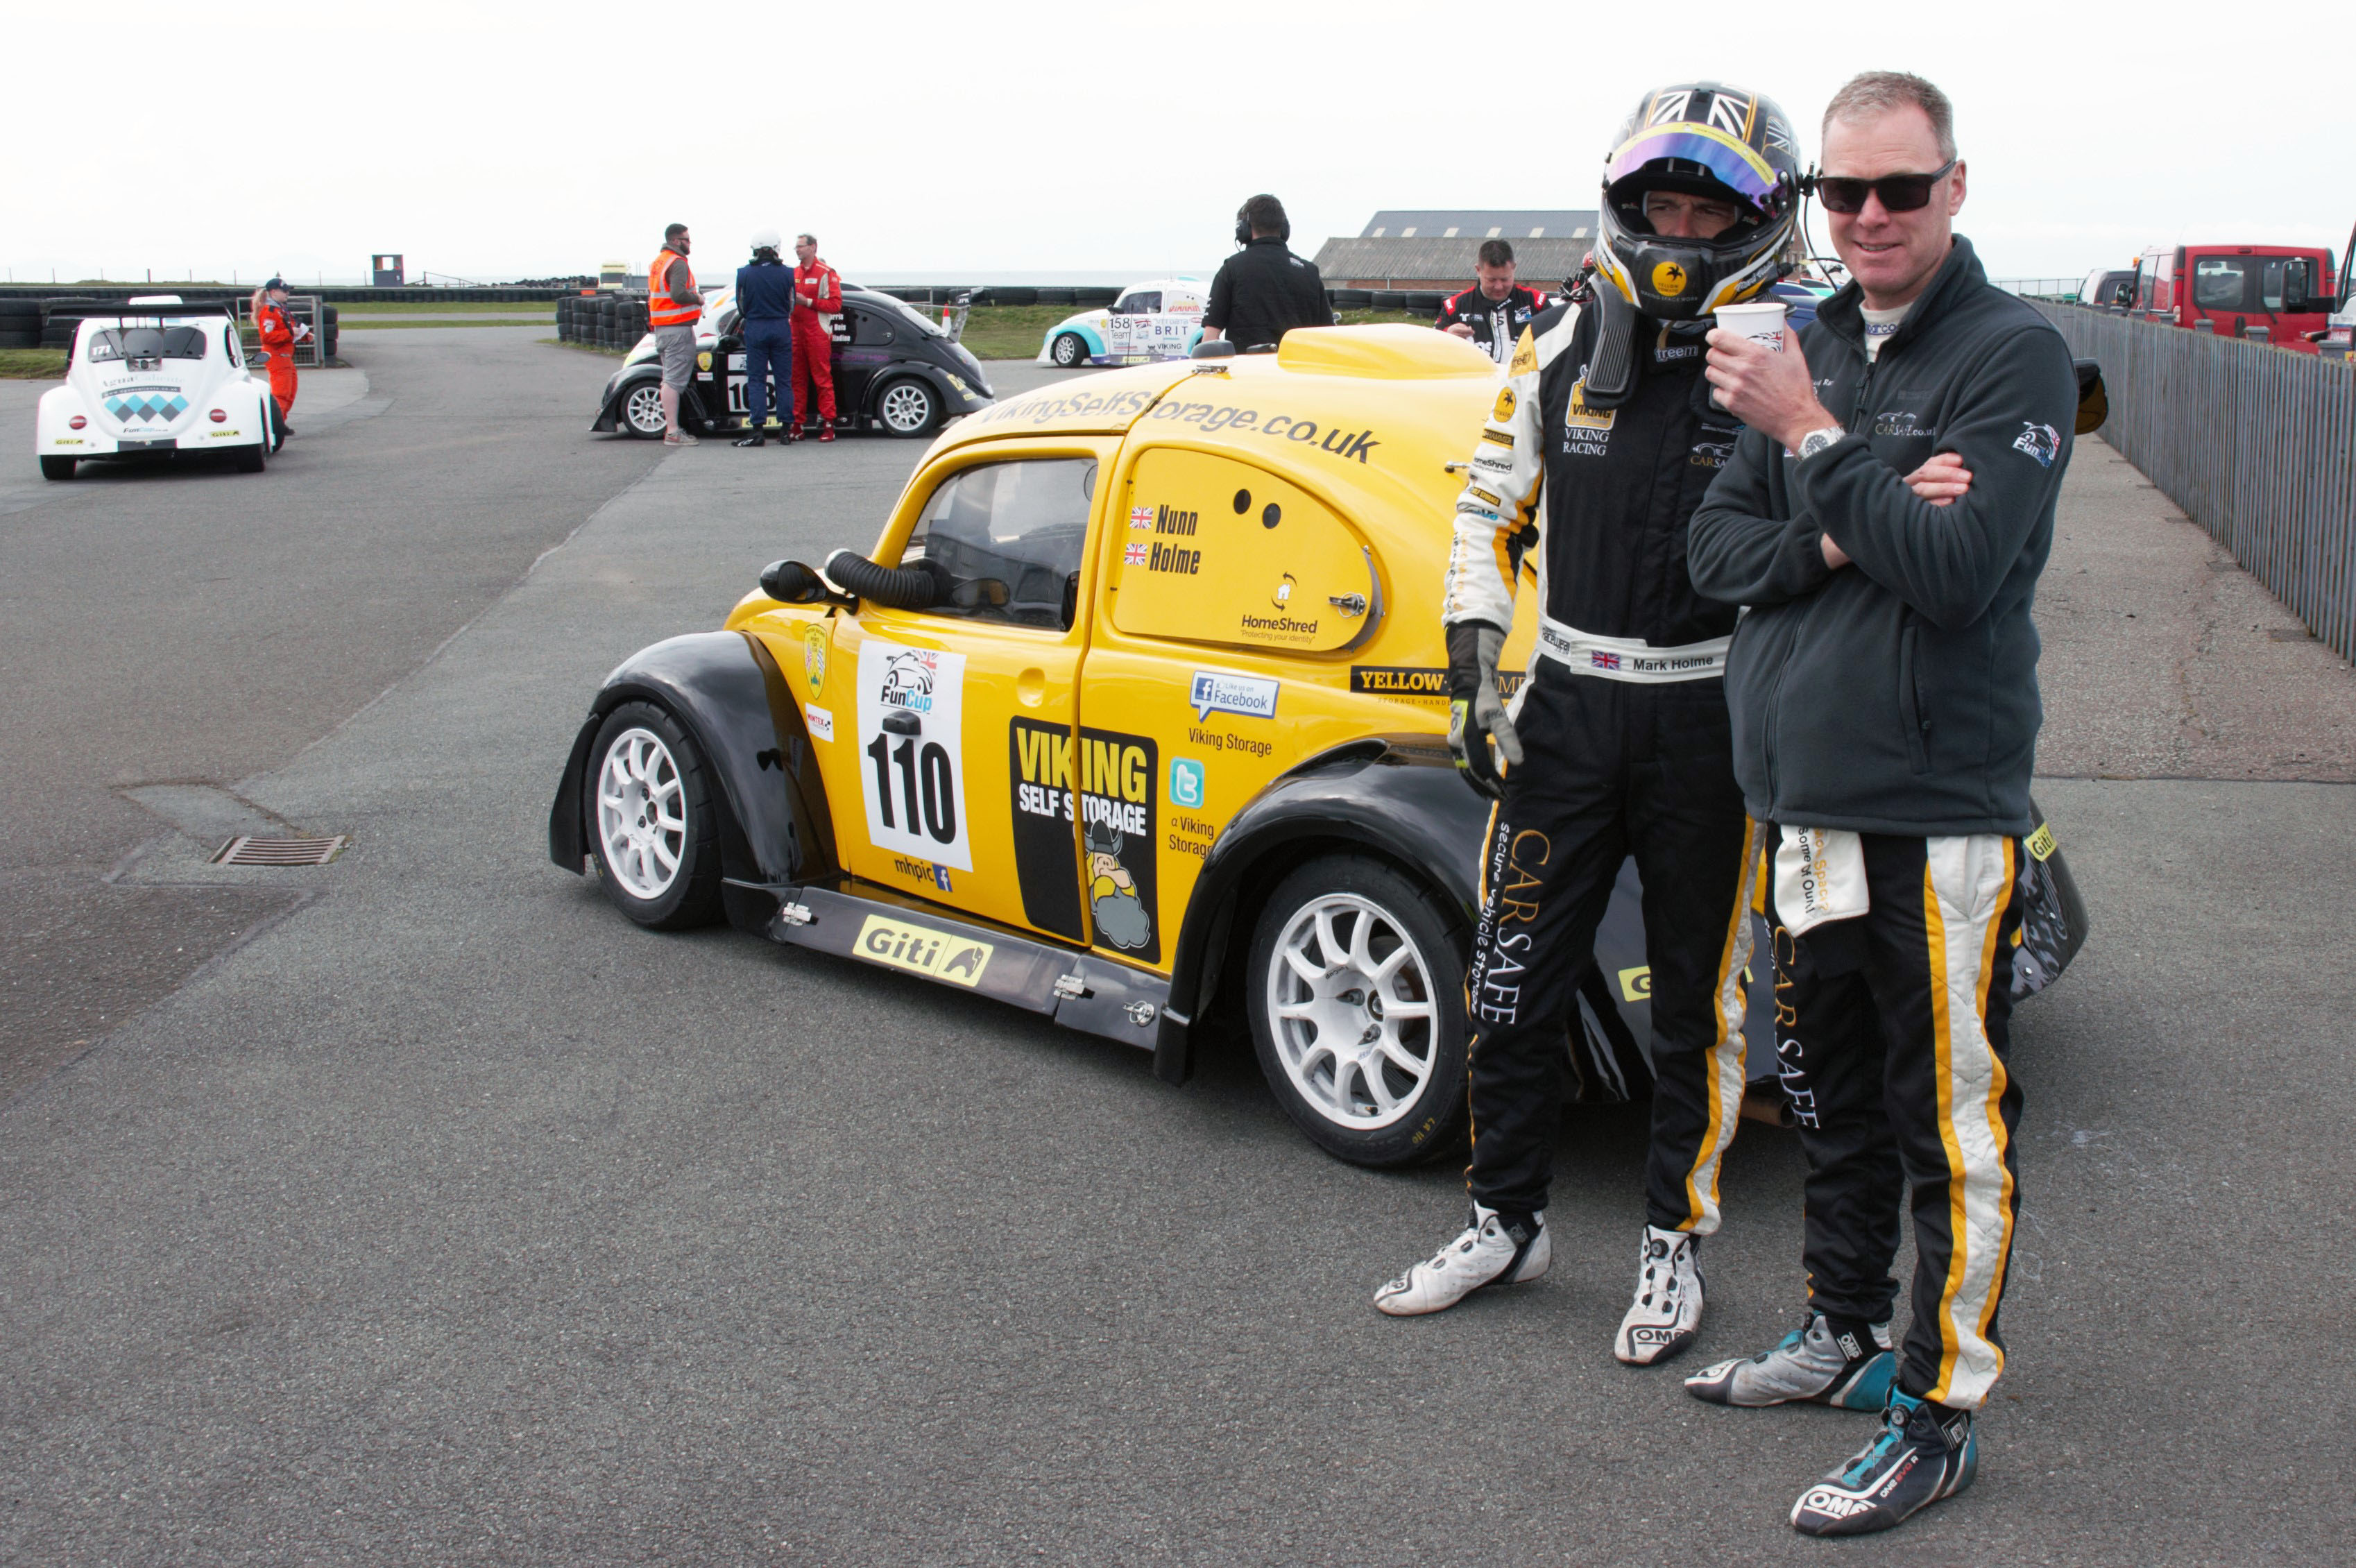 Team CarSafe take to the track